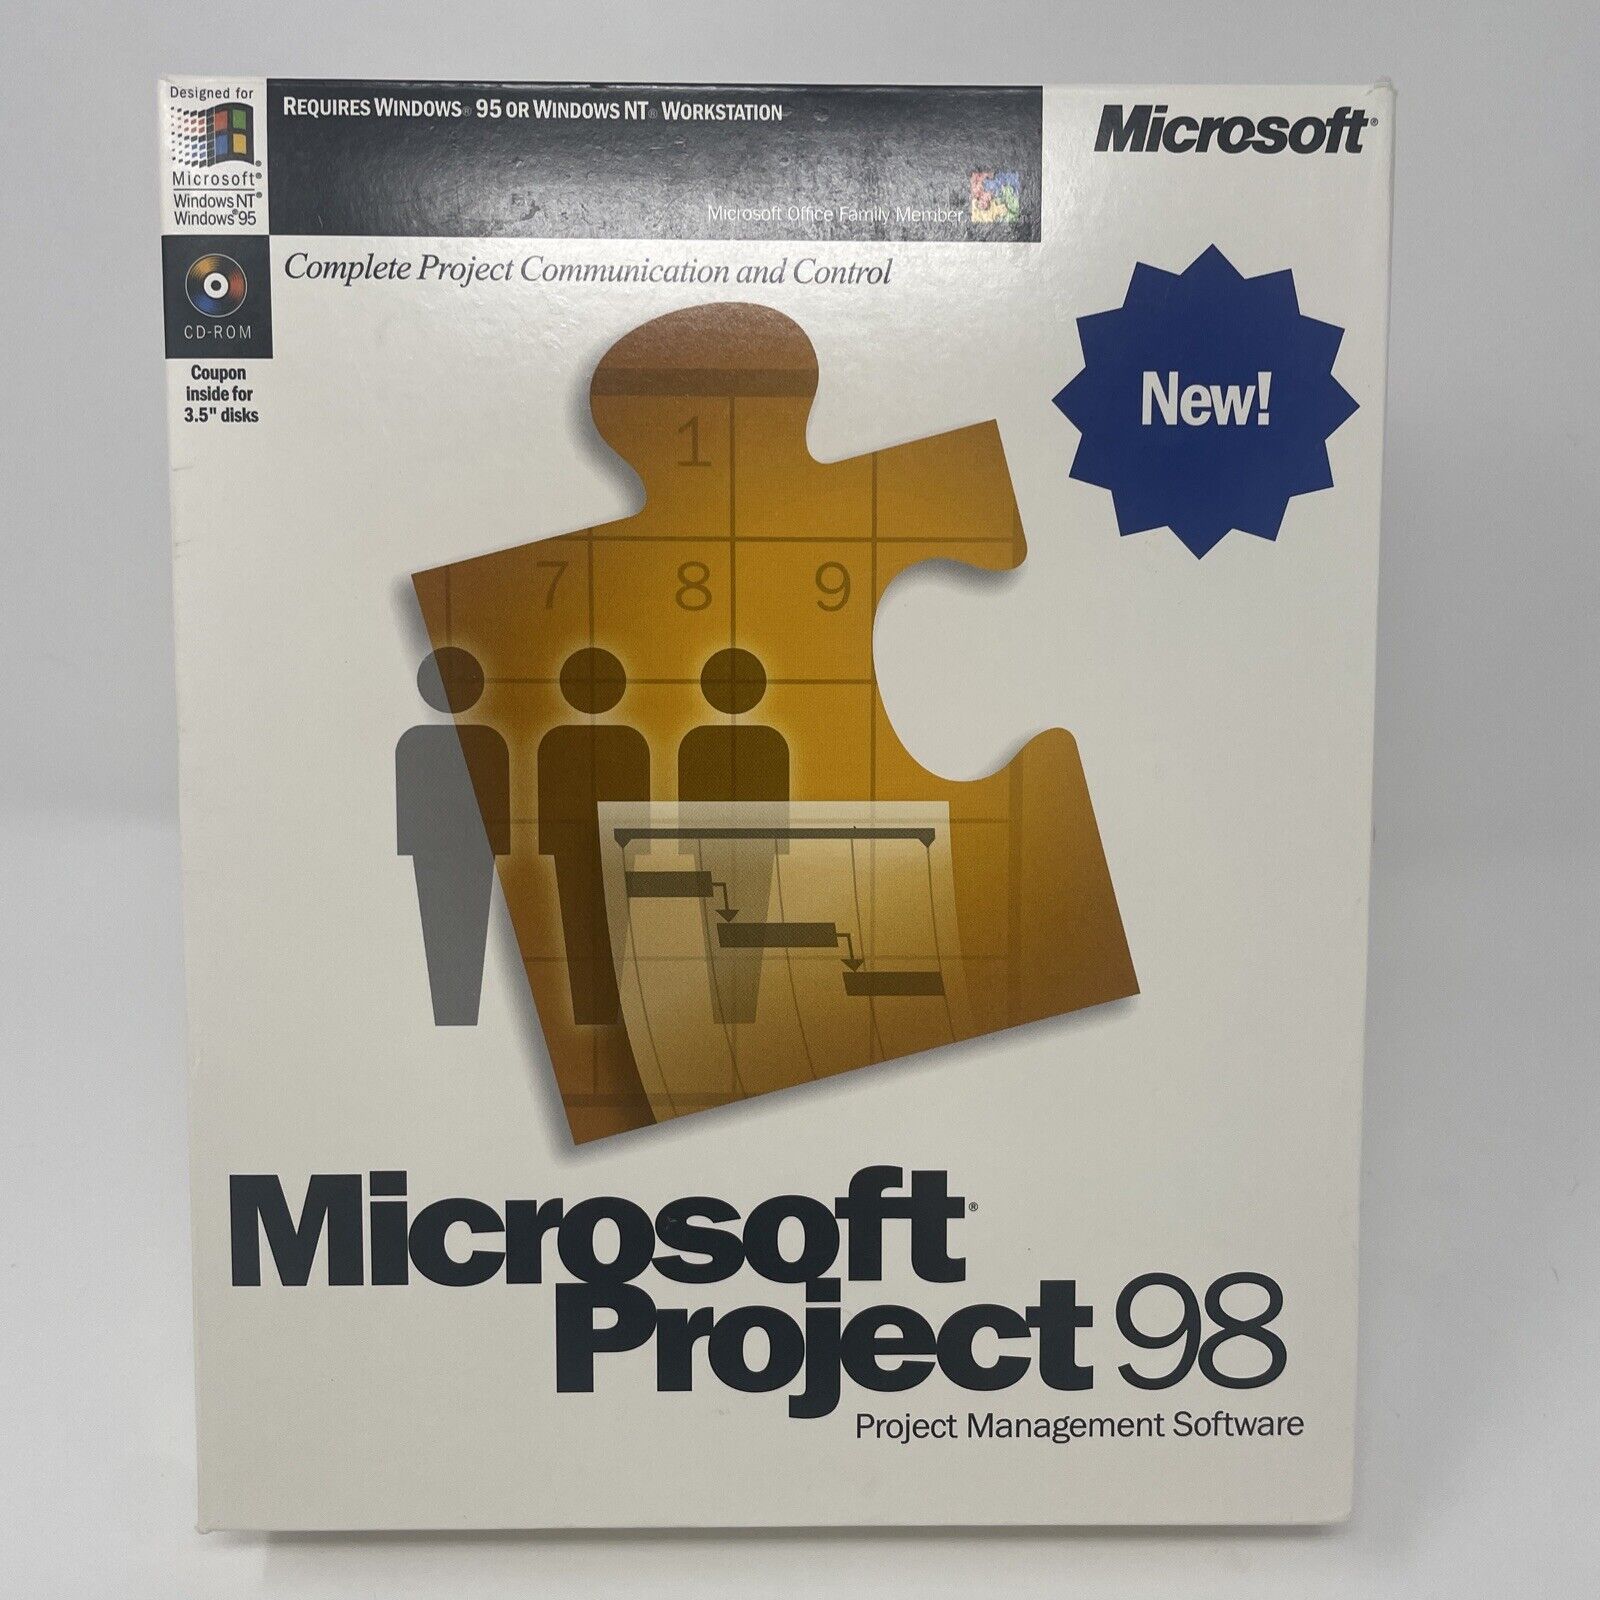 Microsoft Project 98 Full Version For PC With Product Key